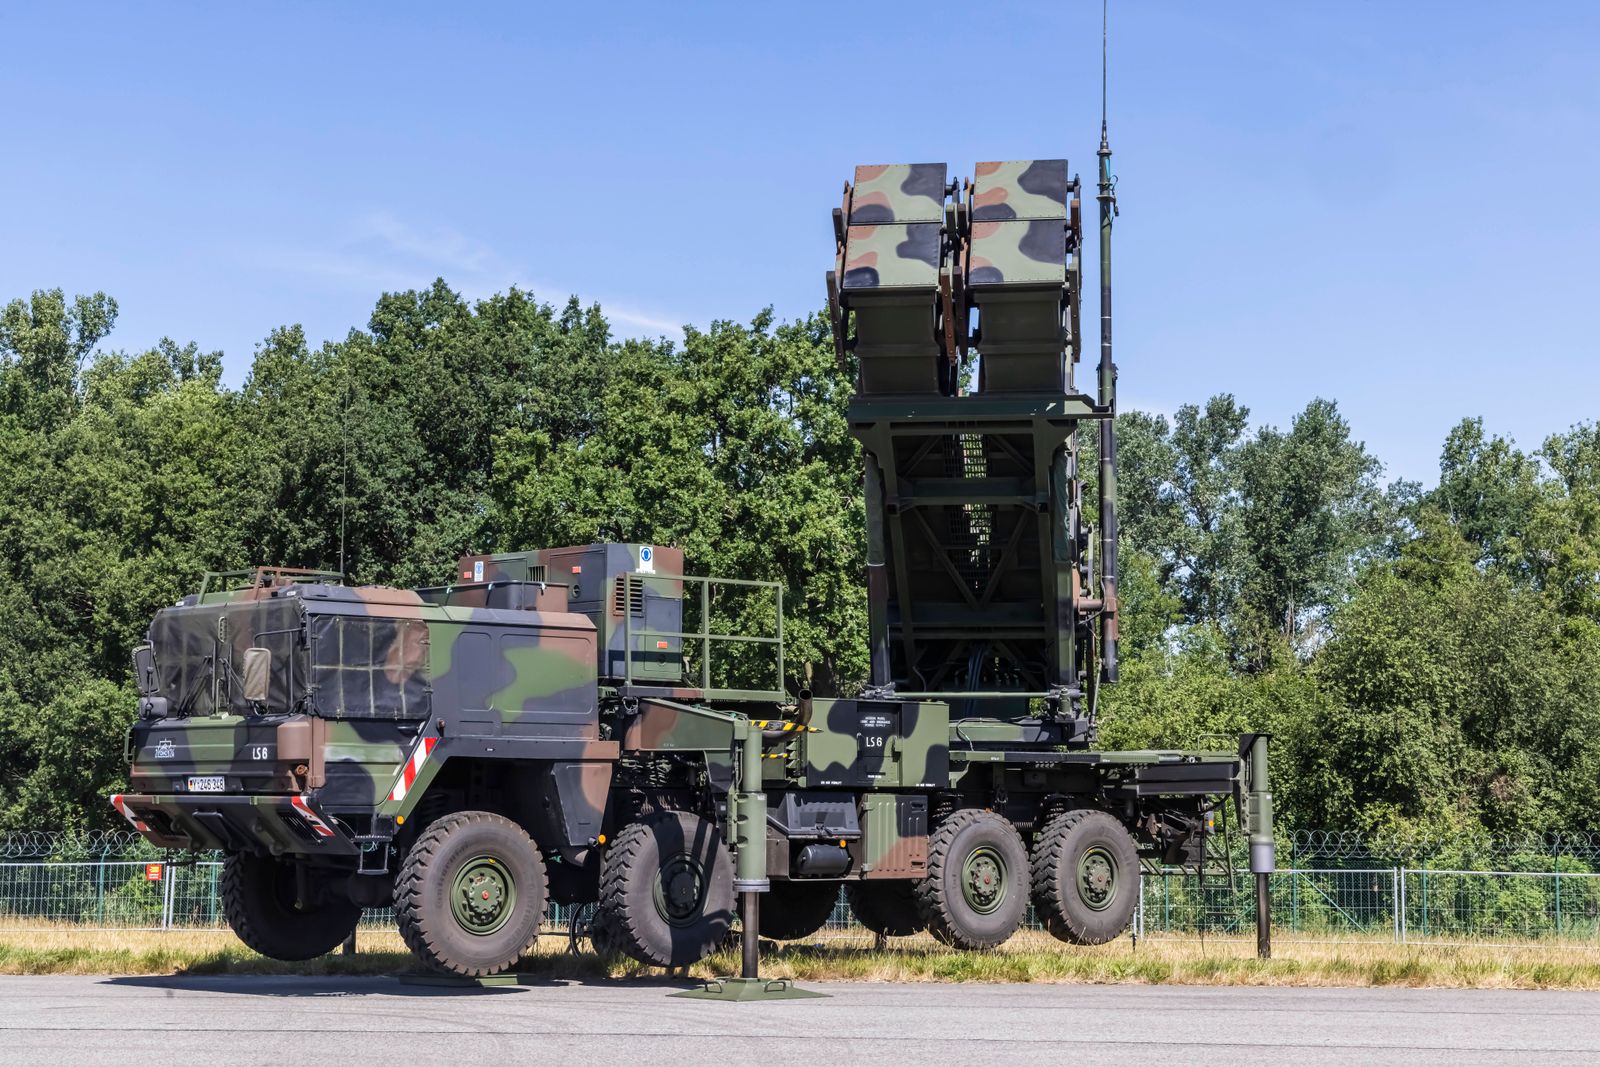 Germany refused to send Patriot air defense systems to Ukraine - they will be deployed in Poland